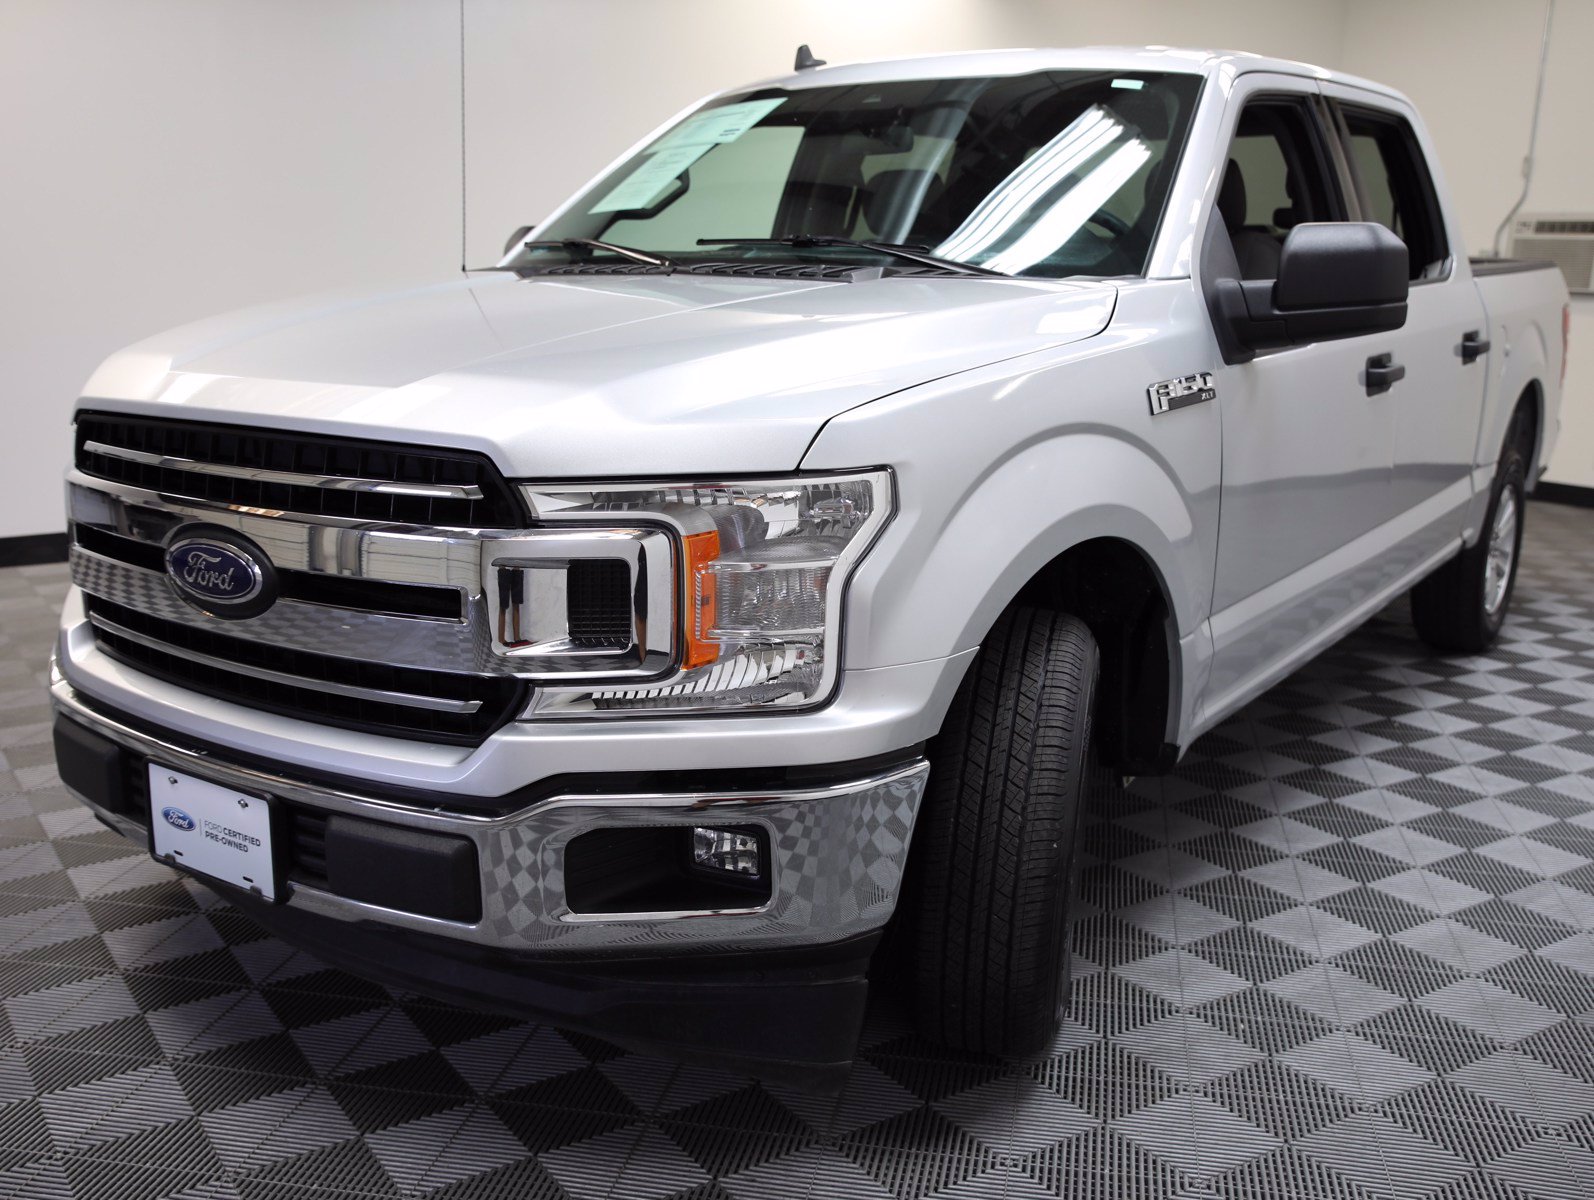 Certified Pre-Owned 2019 Ford F-150 XLT Crew Cab Pickup in San Antonio